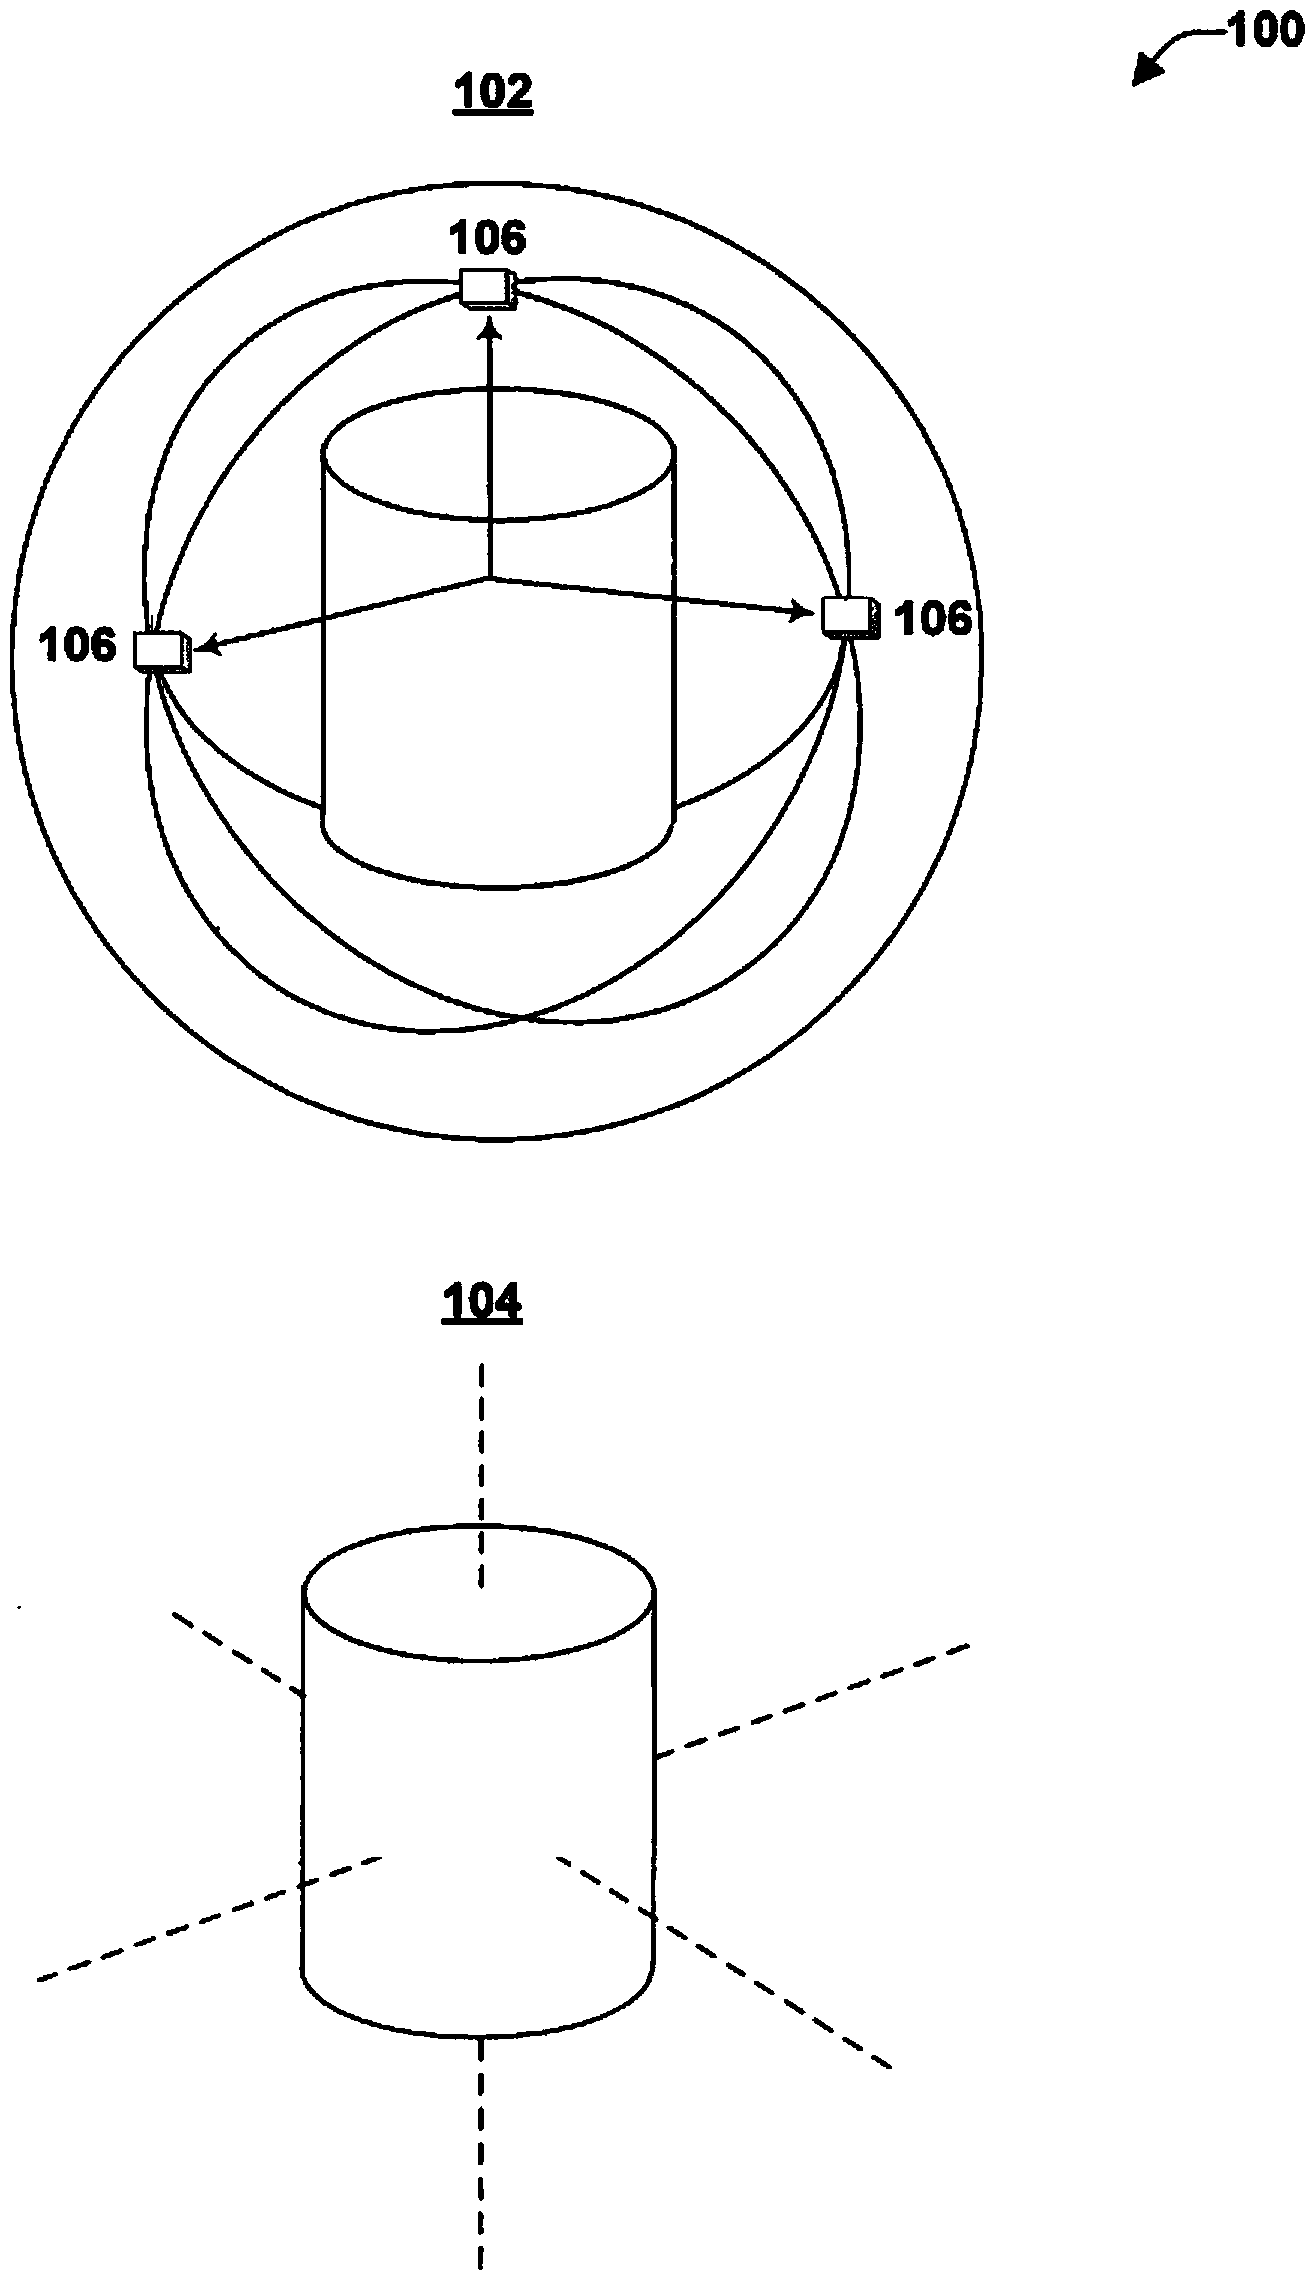 System and method for constrained manipulations of 3d objects by multitouch inputs